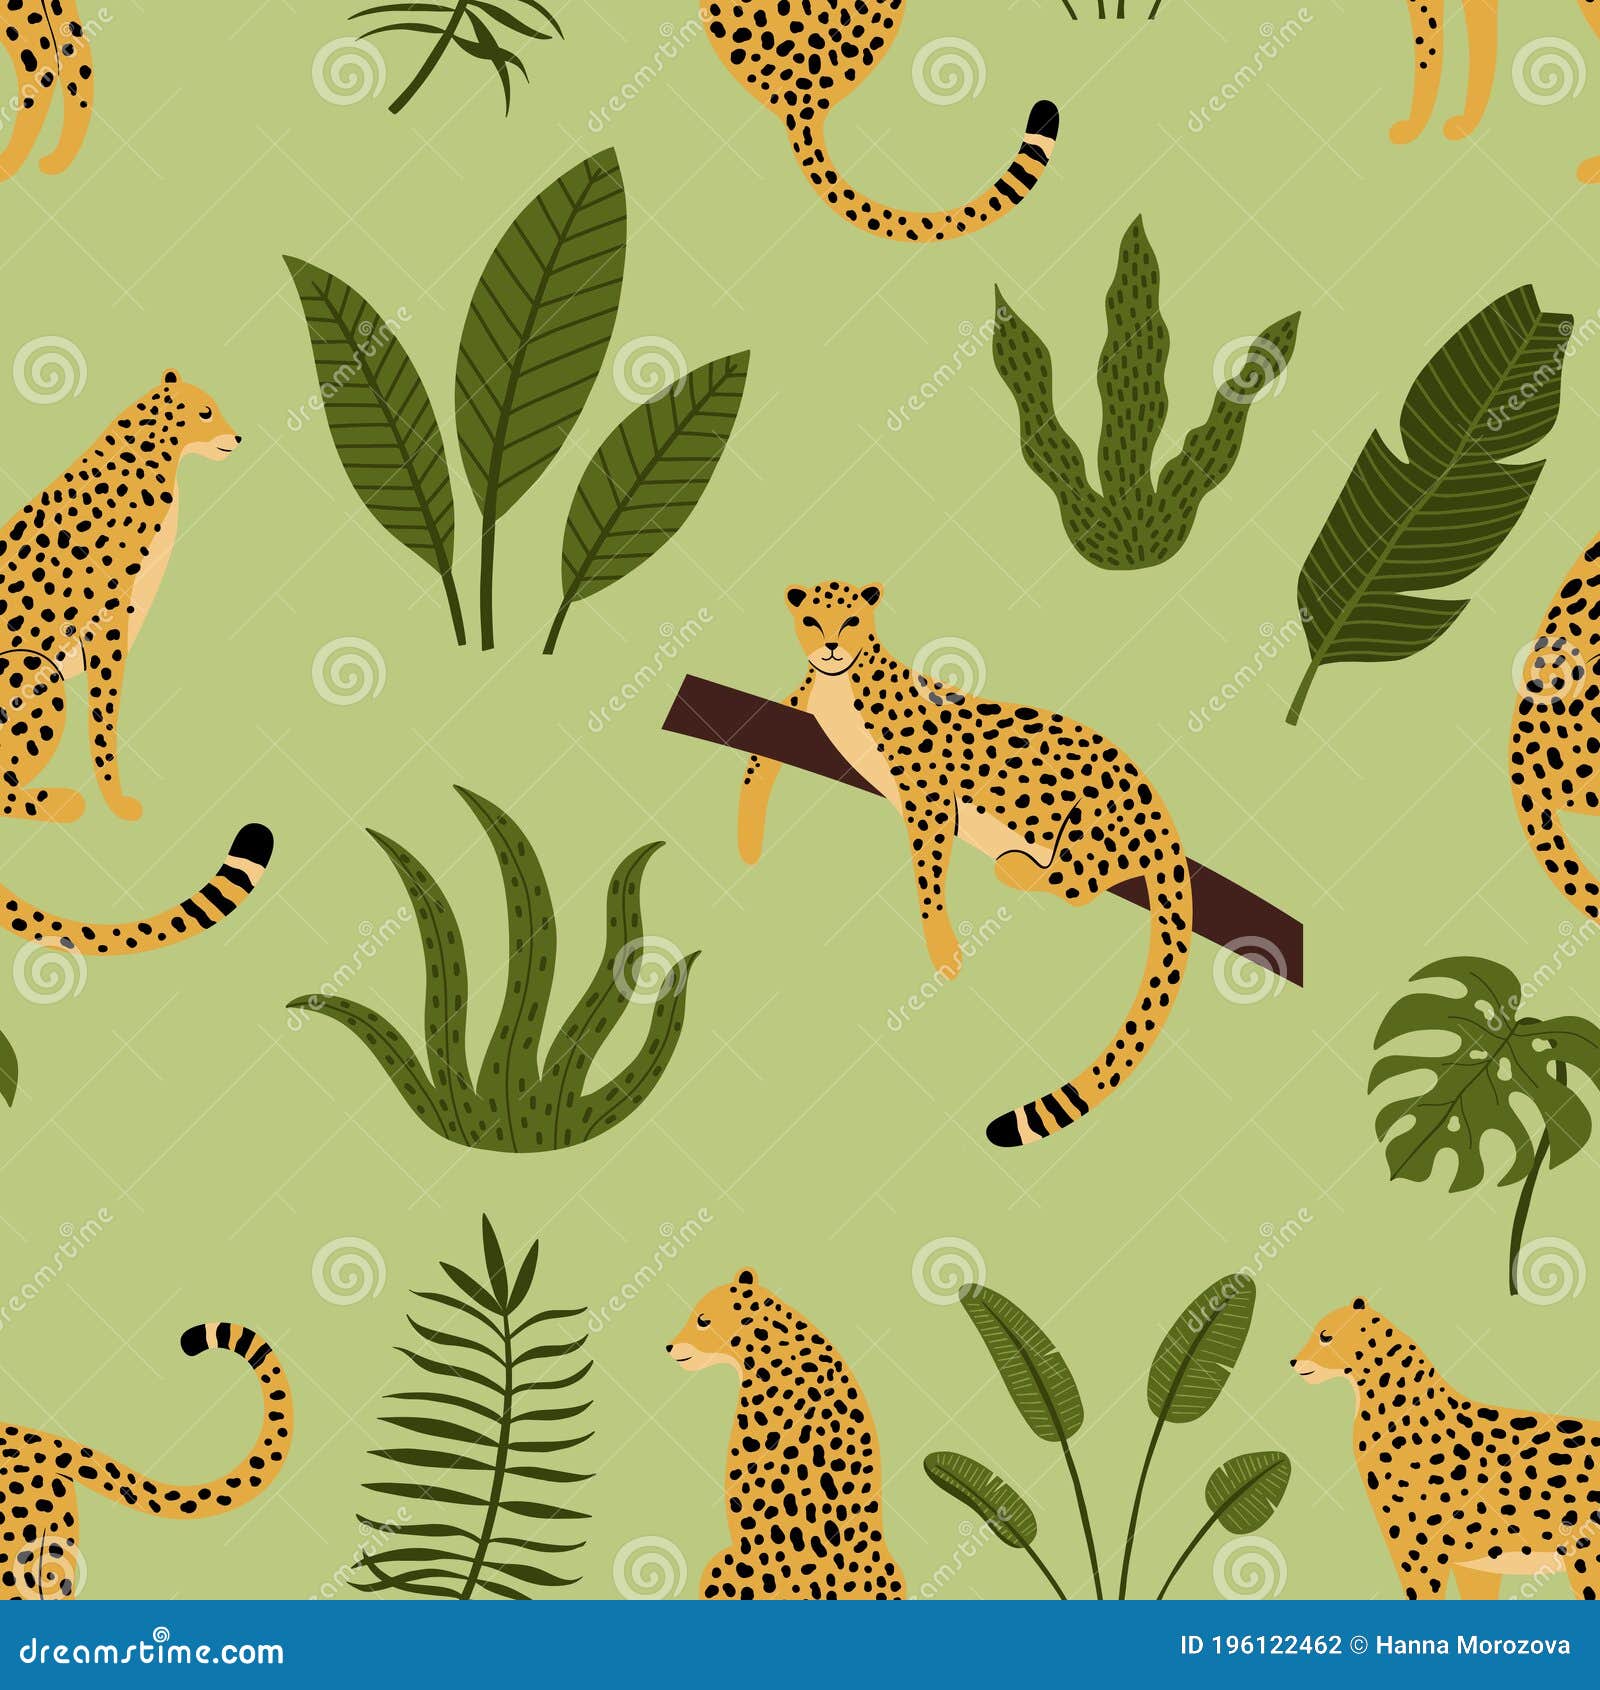 Leopard Seamless Pattern with Tropical Leaves Stock Vector ...